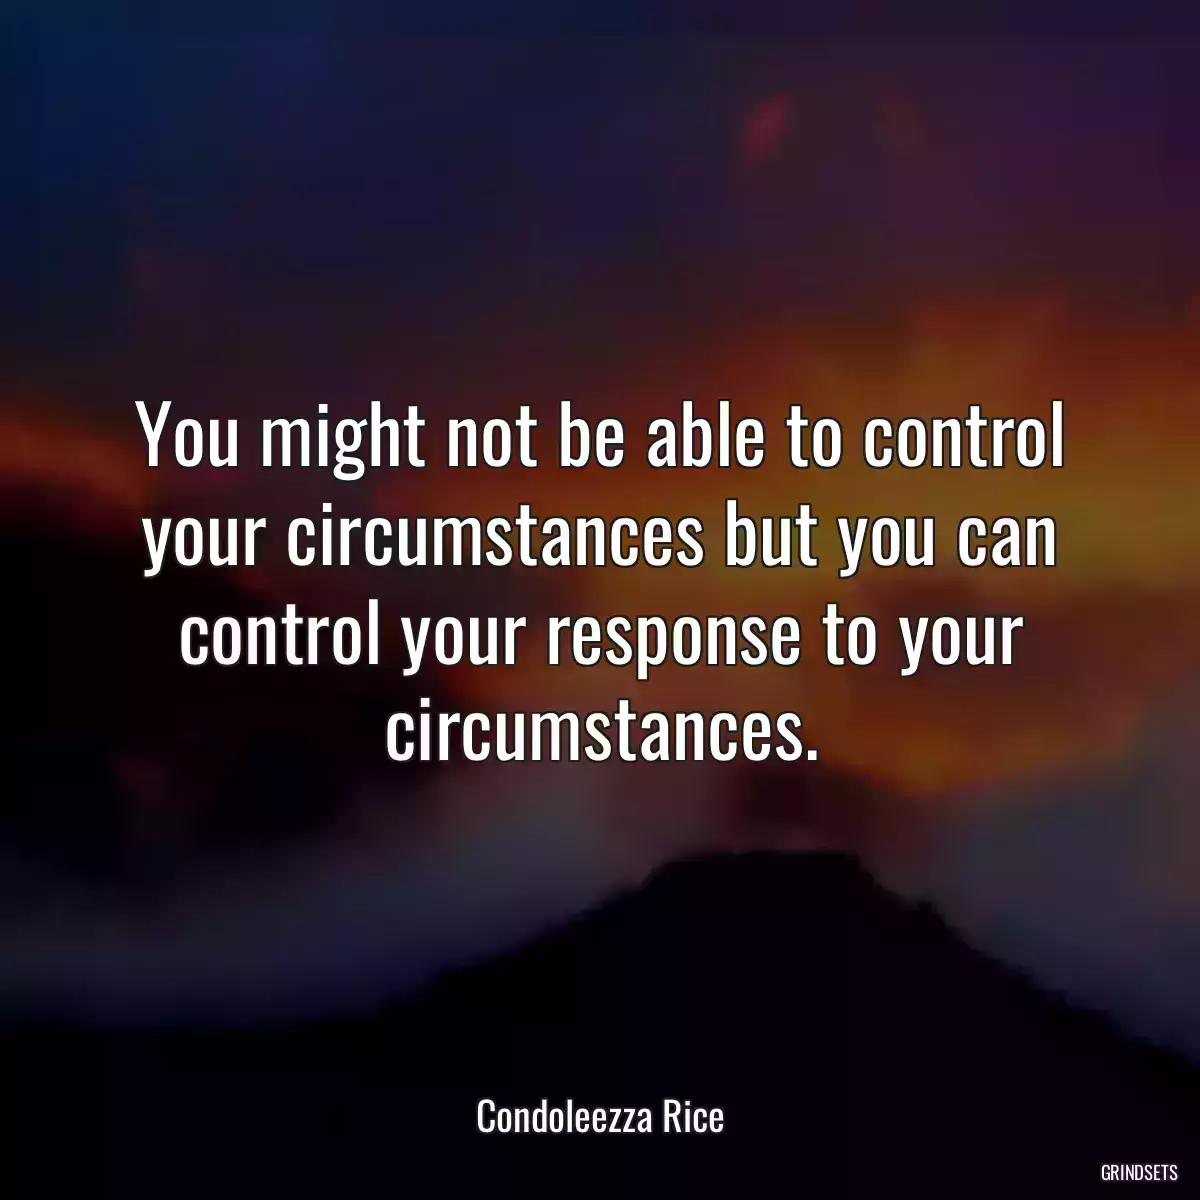 You might not be able to control your circumstances but you can control your response to your circumstances.